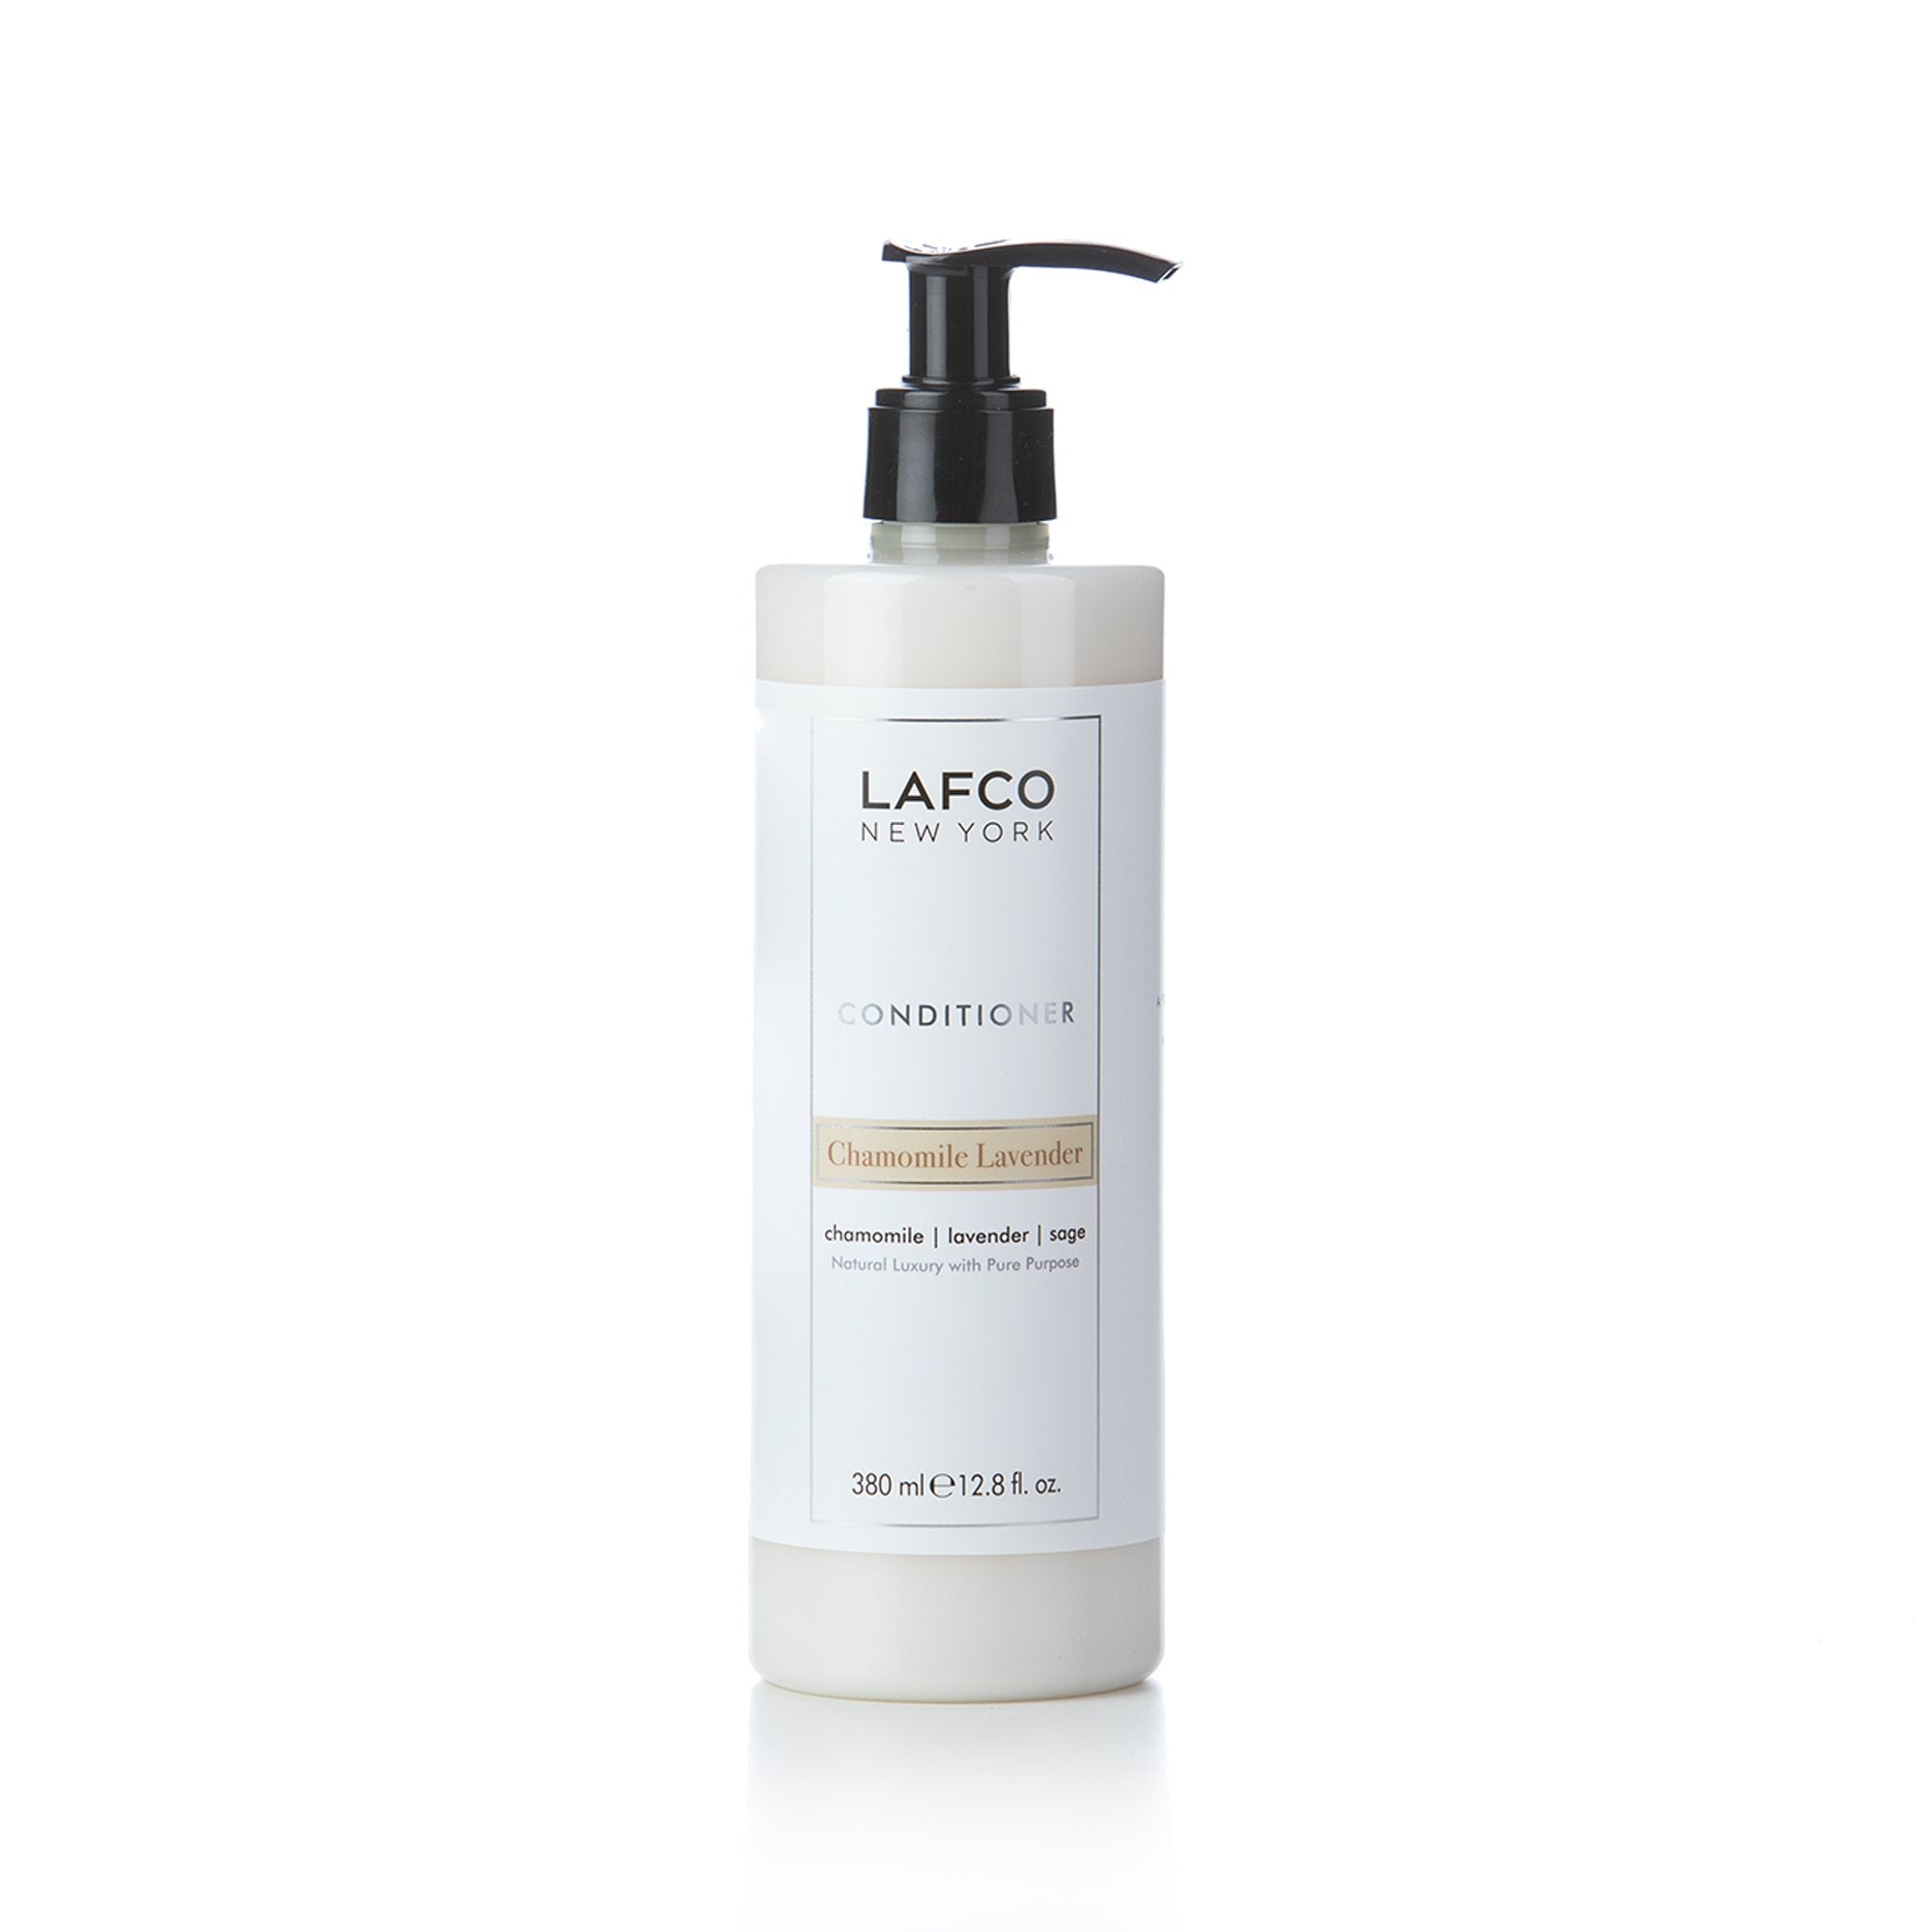 Lafco "Chamomile Lavender" Conditioner With Locked Pump (12.84 Fluid Ounce) 